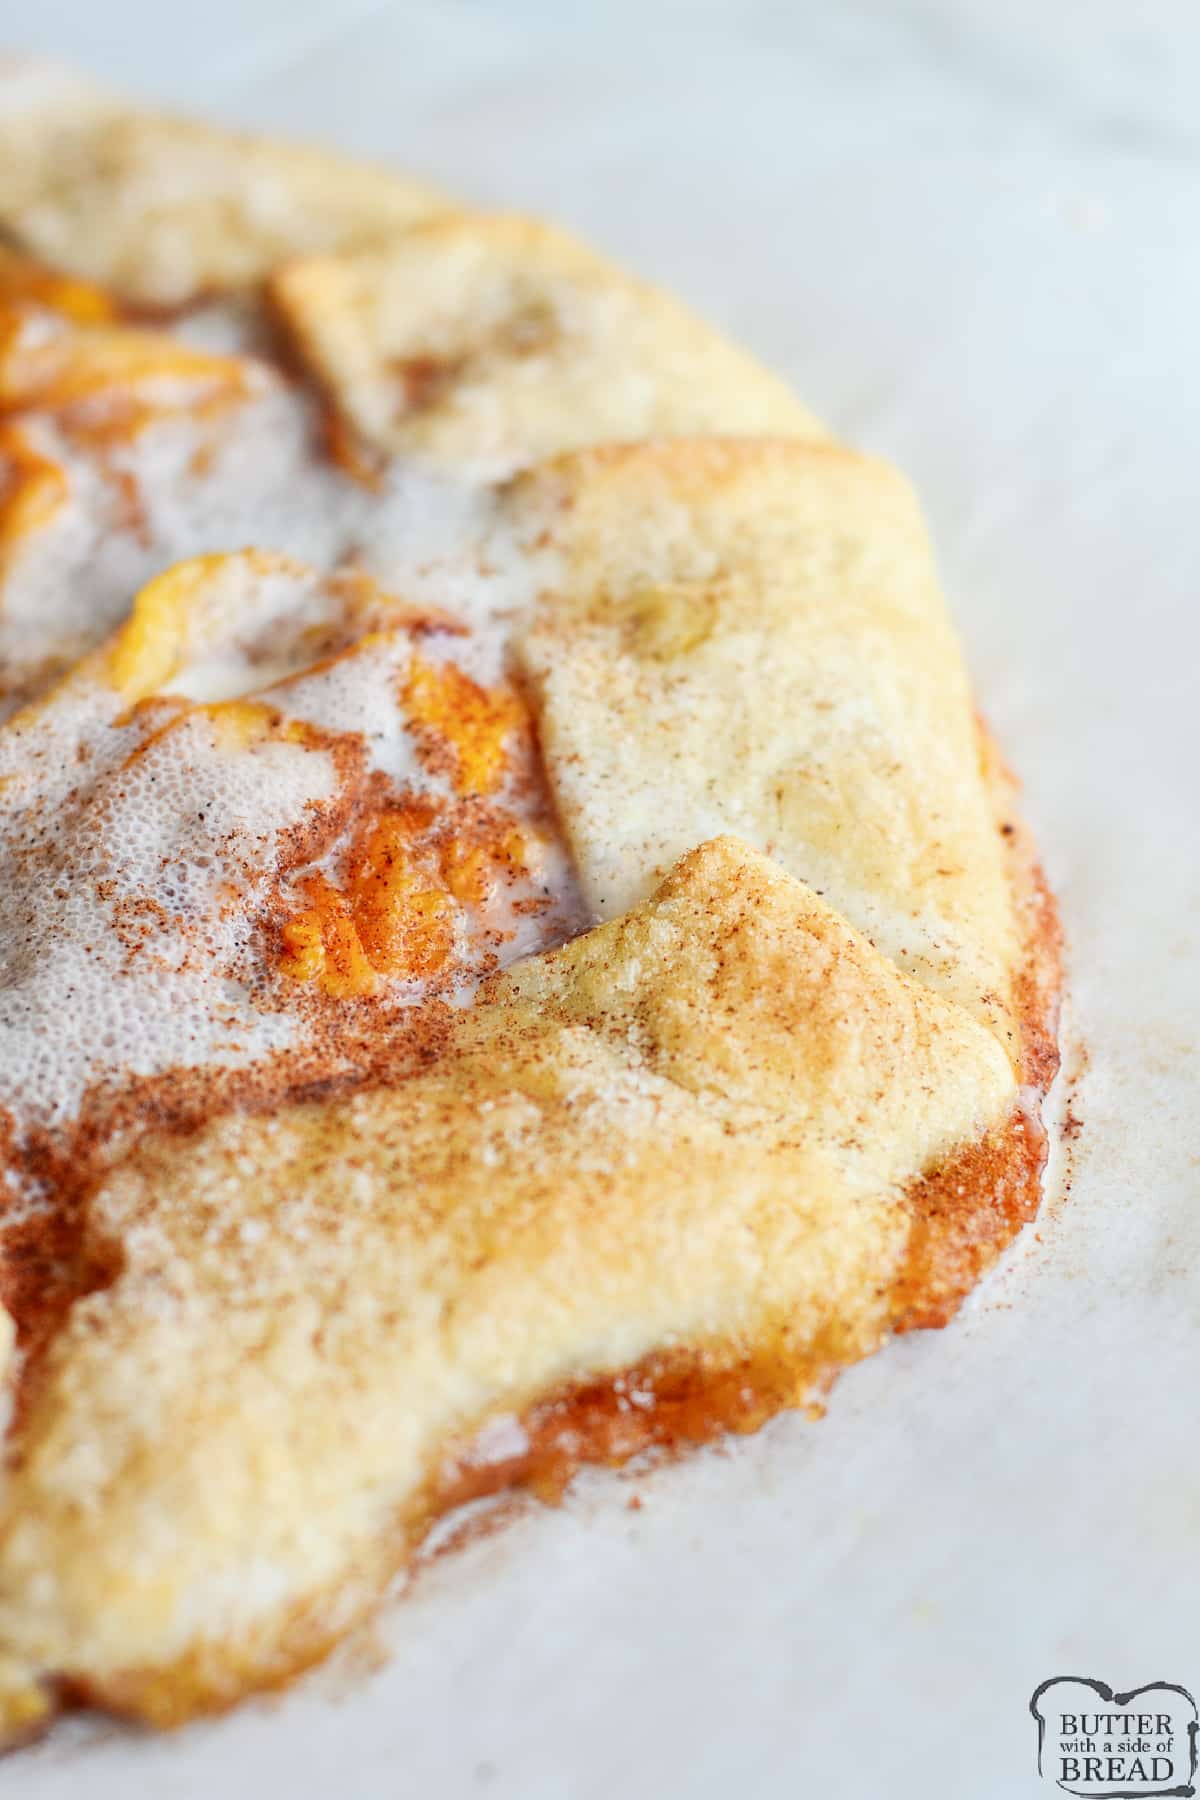 Easy Peach Galette made with fresh peaches and a simple pie crust recipe. Simple peach dessert that tastes even better with a scoop of vanilla ice cream!